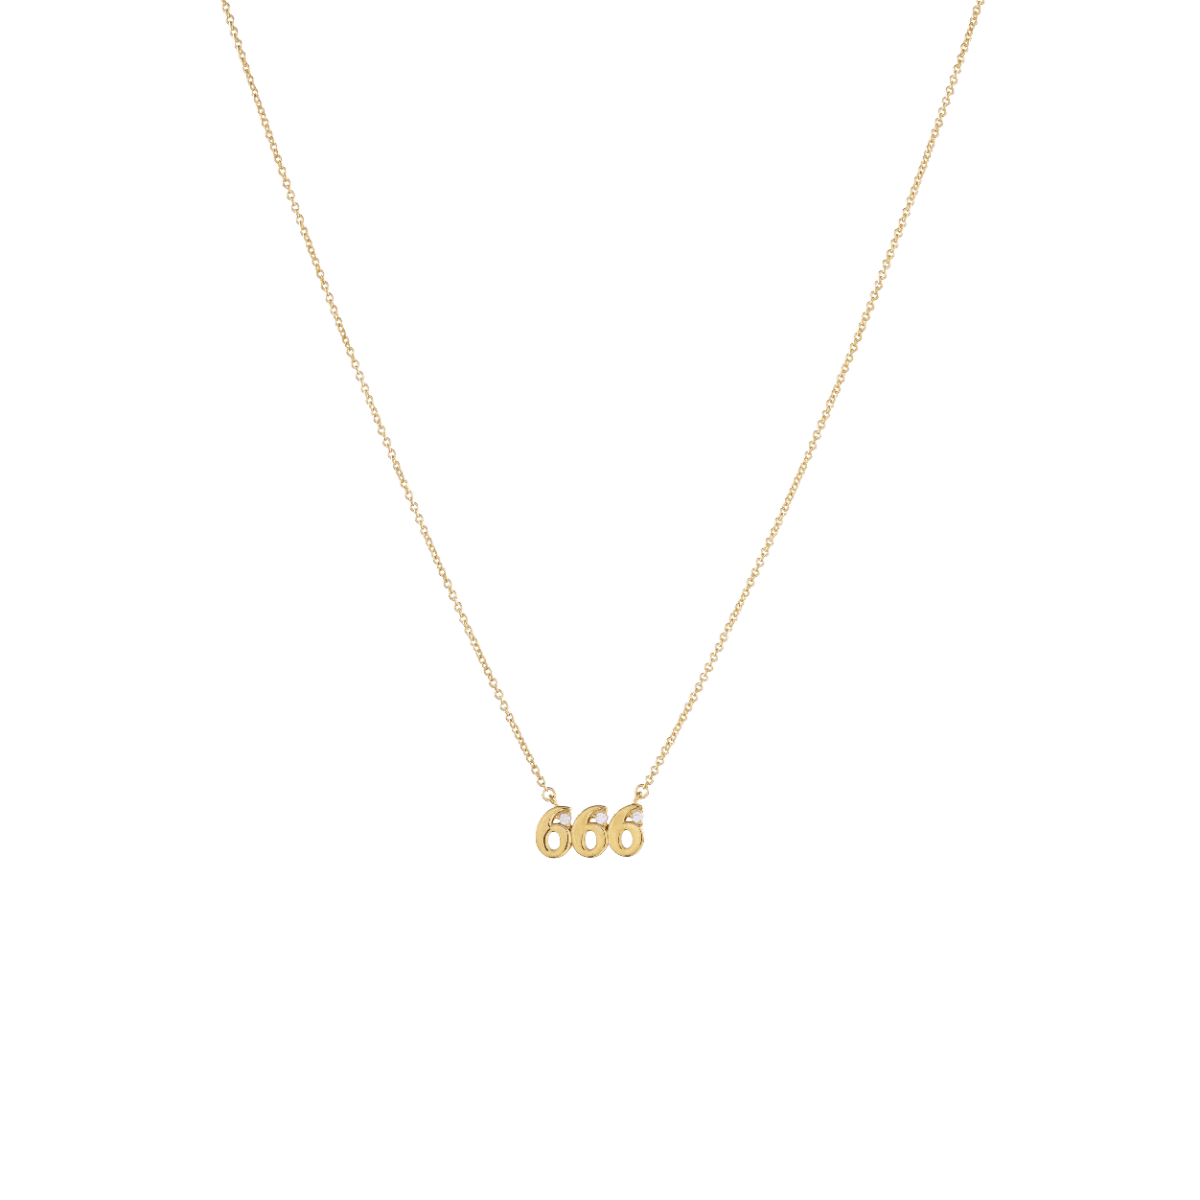 666 - Reflect Necklace